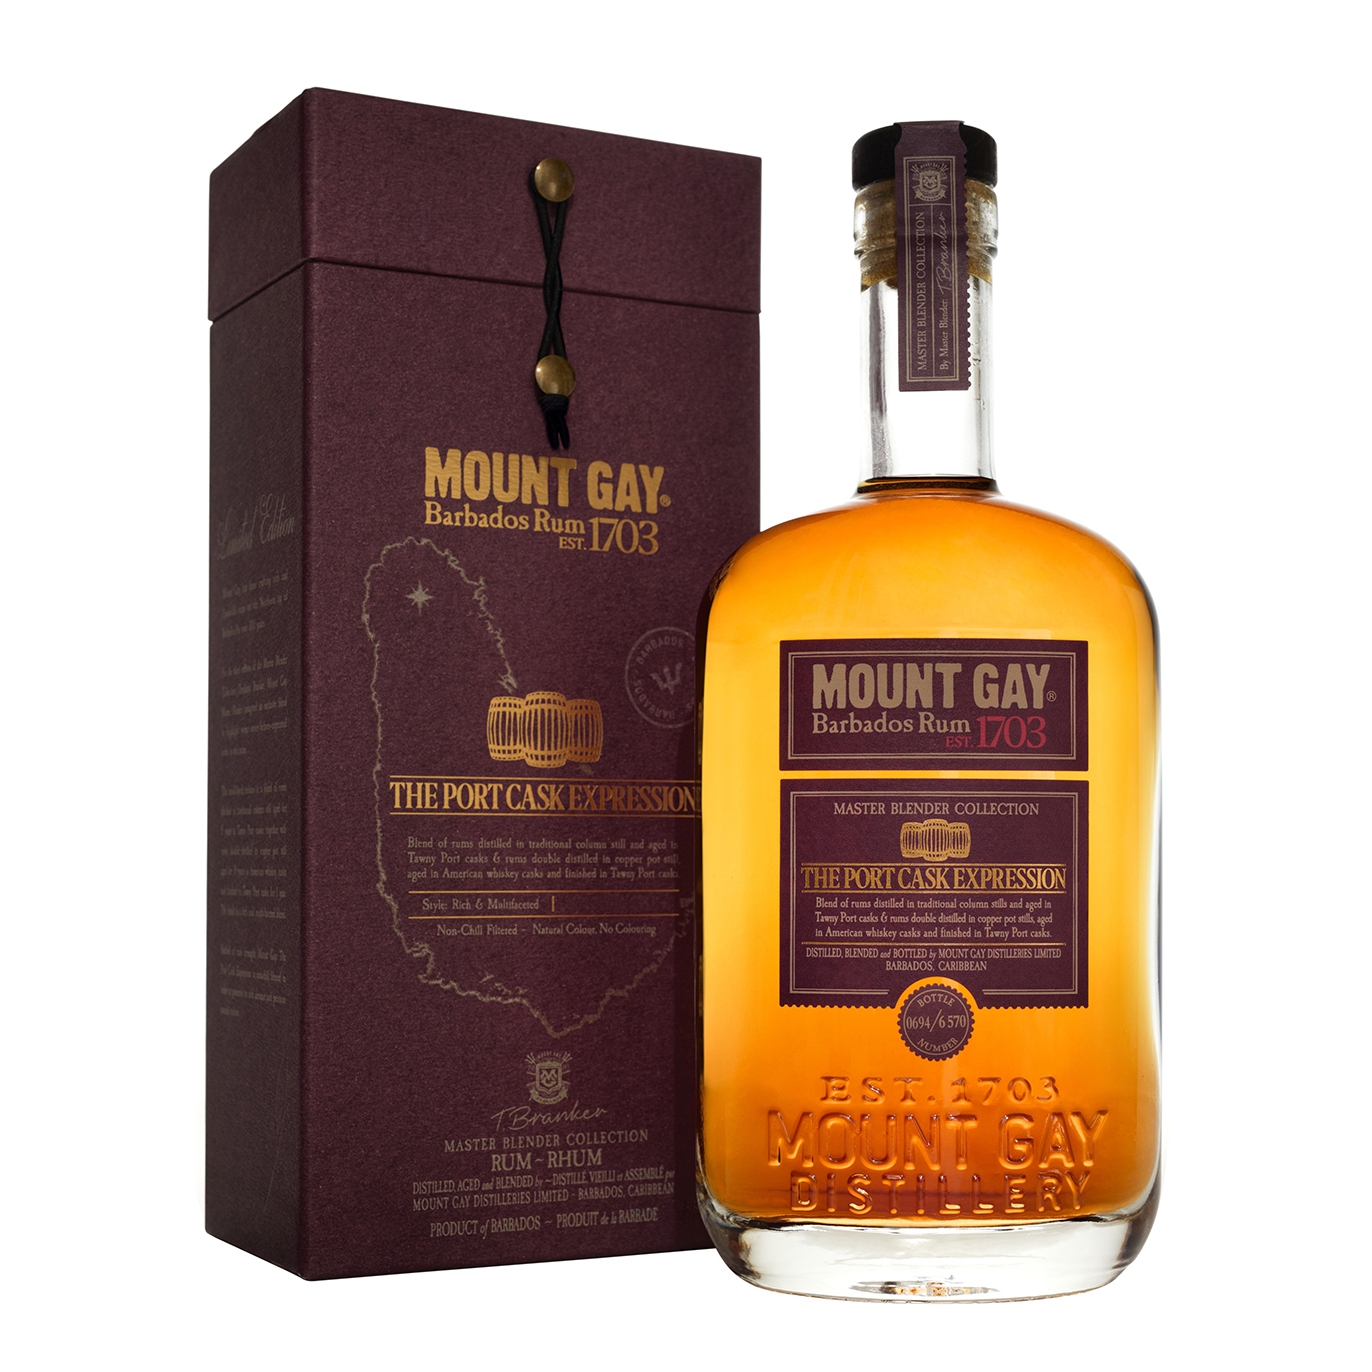 Mount Gay The Port Cask Expression Rum